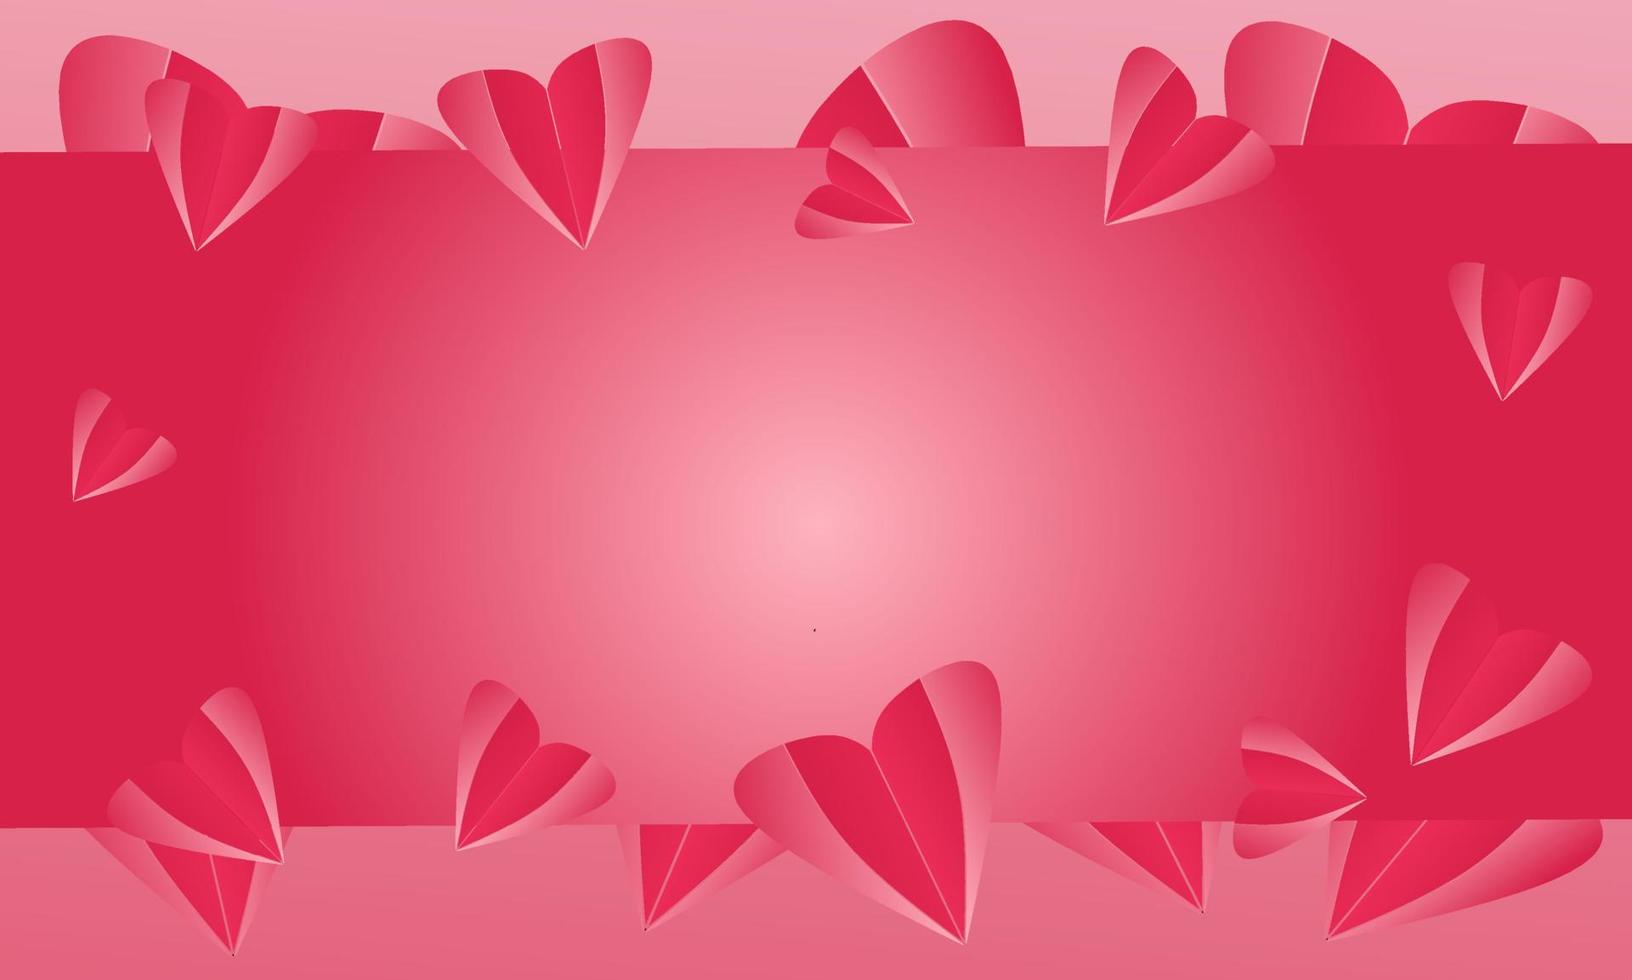 Valentine's Day background.happy valentine's day background design with romantic heart shape elements.for Greeting cards, banners, posters etc vector